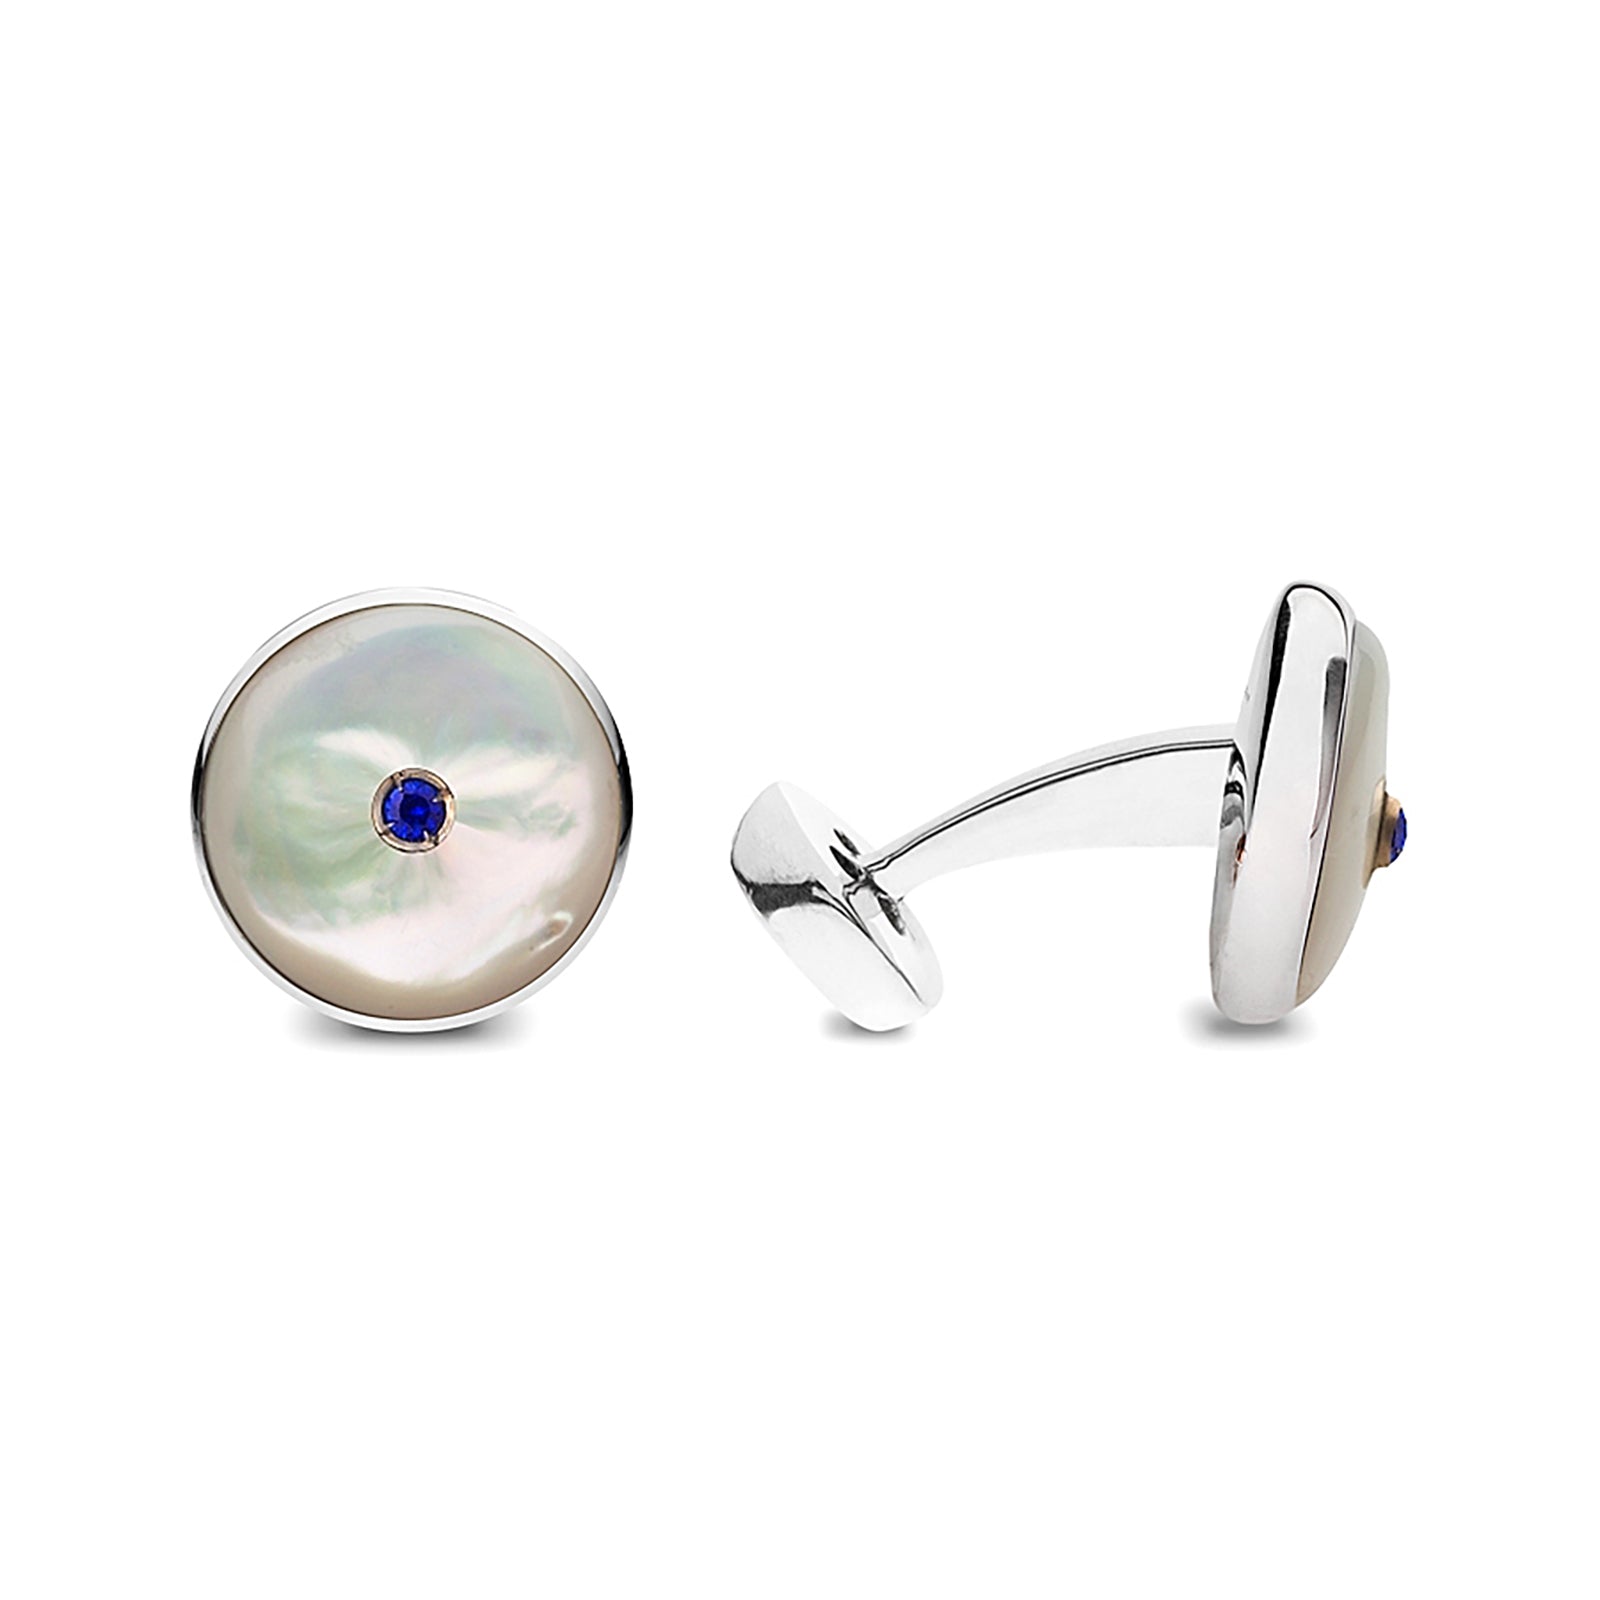 Mother of Pearl cab Gold and Sapphires Sterling Silver Cufflinks